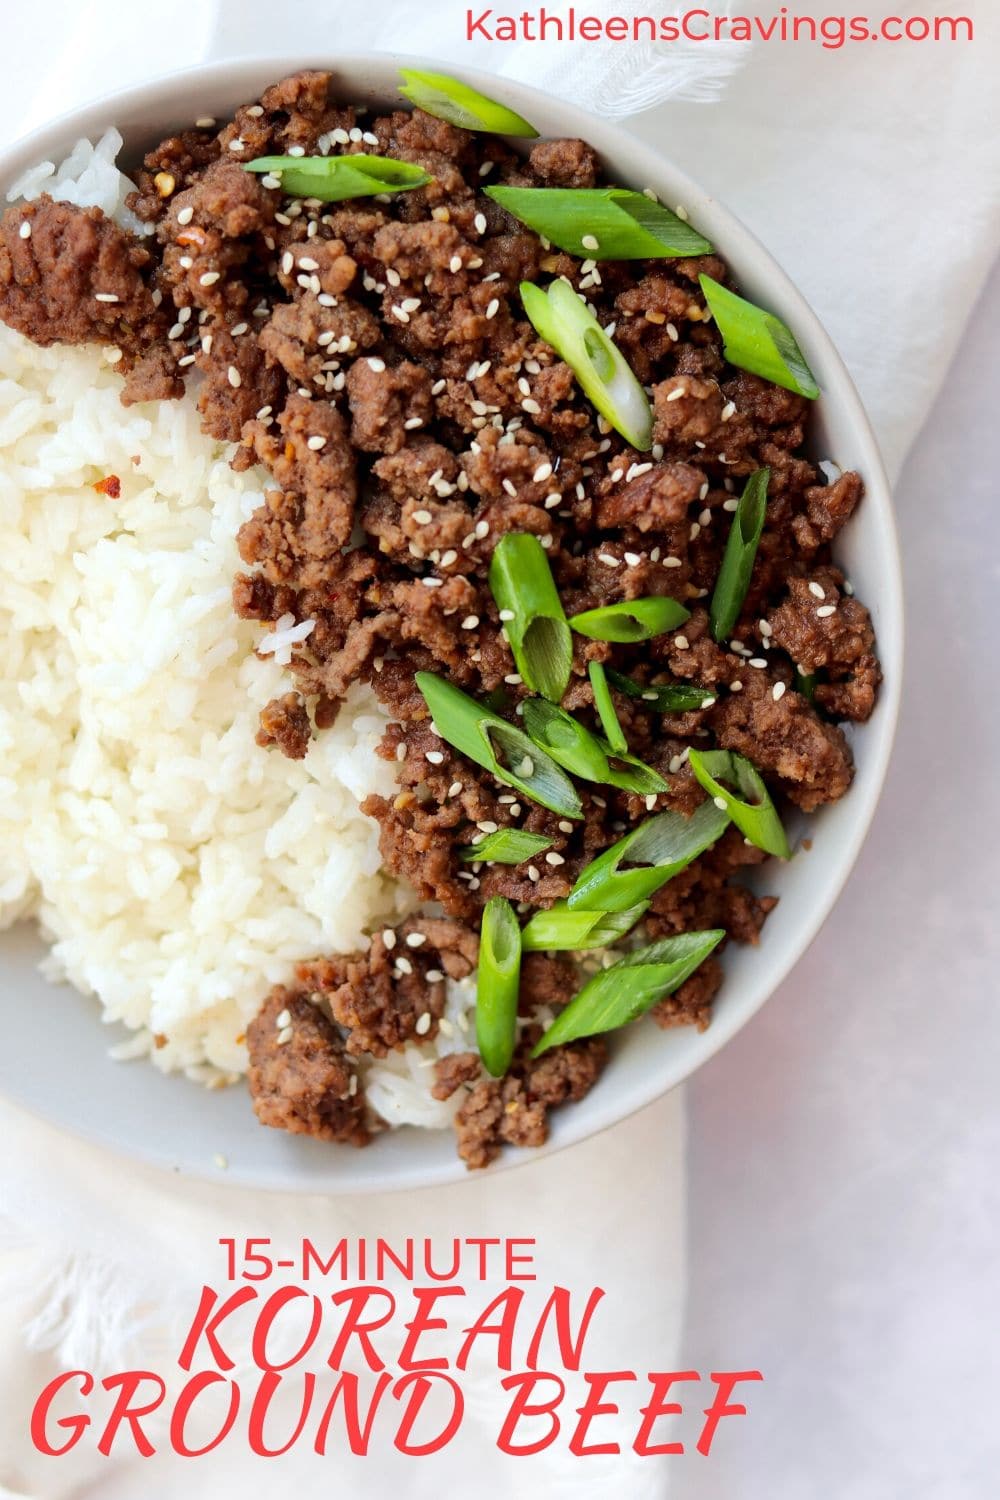 Korean Ground Beef Bowl with text overlay